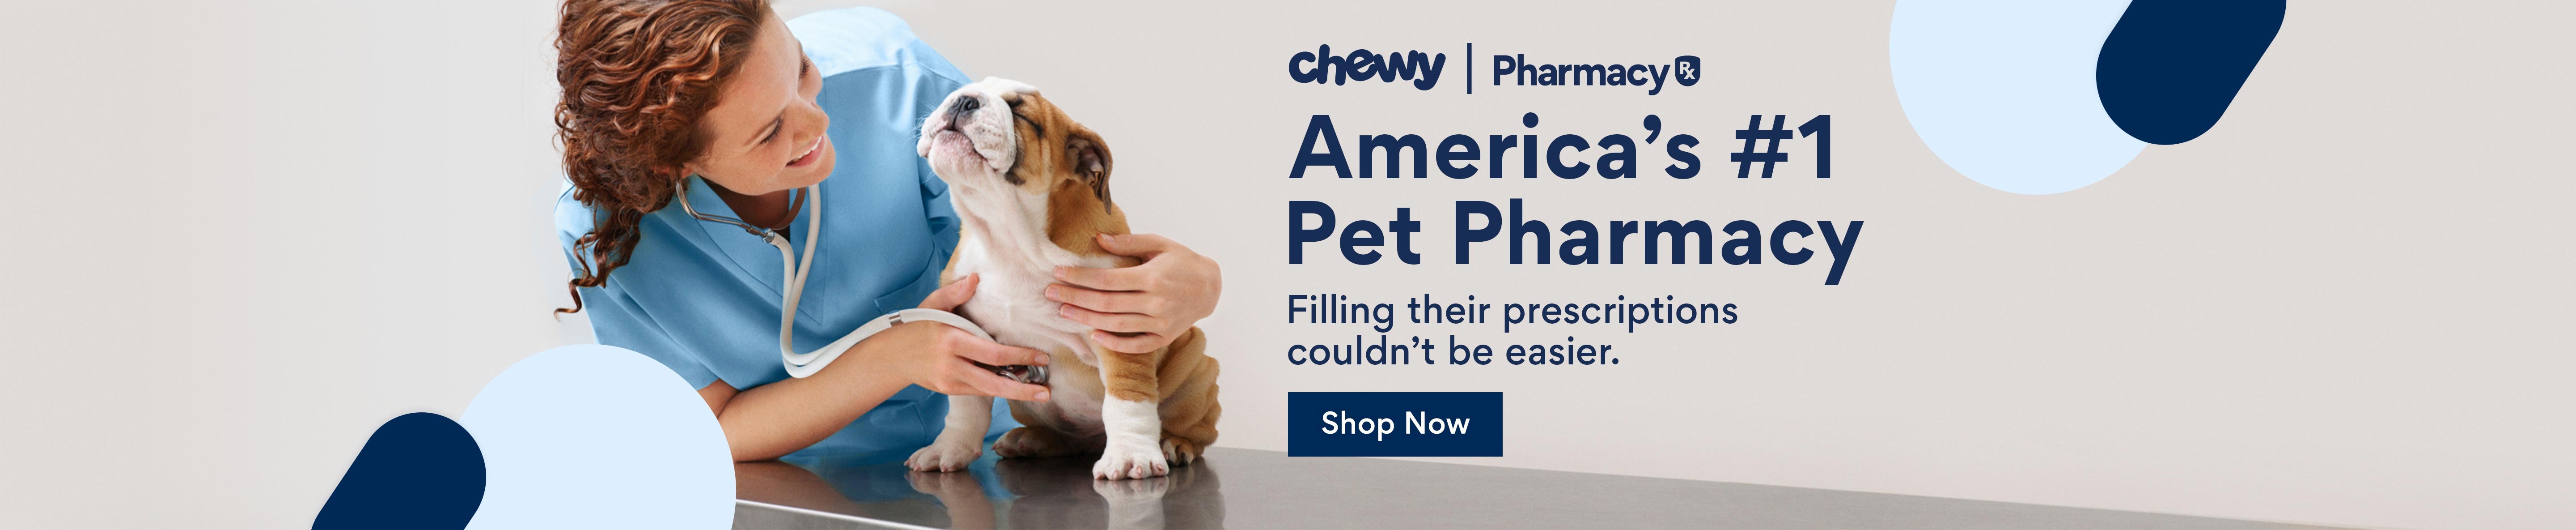 America's #1 Pet Pharmacy. Filling their prescriptions couldn't be easier